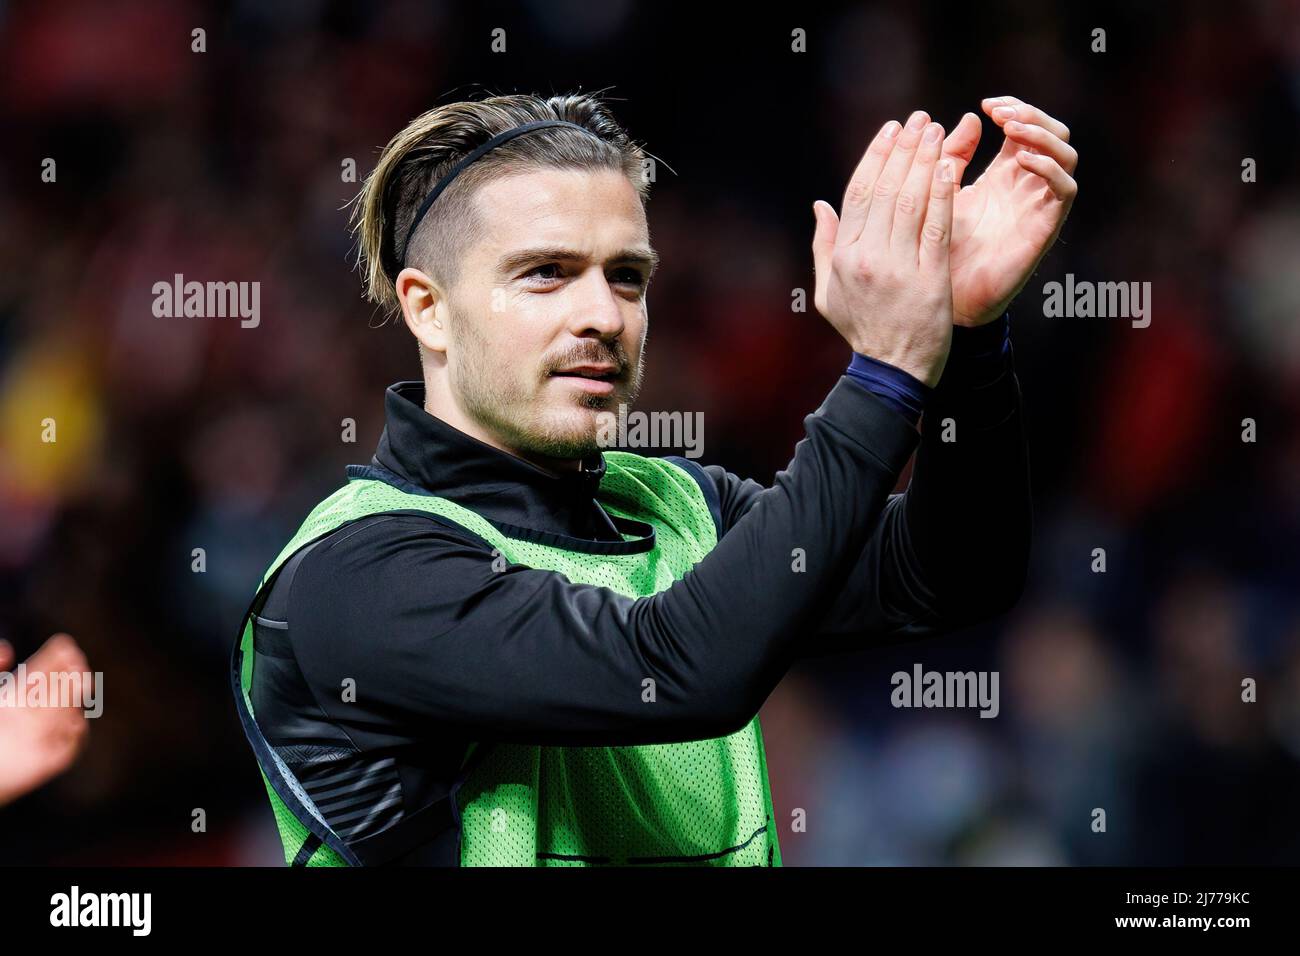 MADRID - APR 13: Grealish celebrates the victory after the Champions League match between Club Atletico de Madrid and Manchester City at the Metropoli Stock Photo